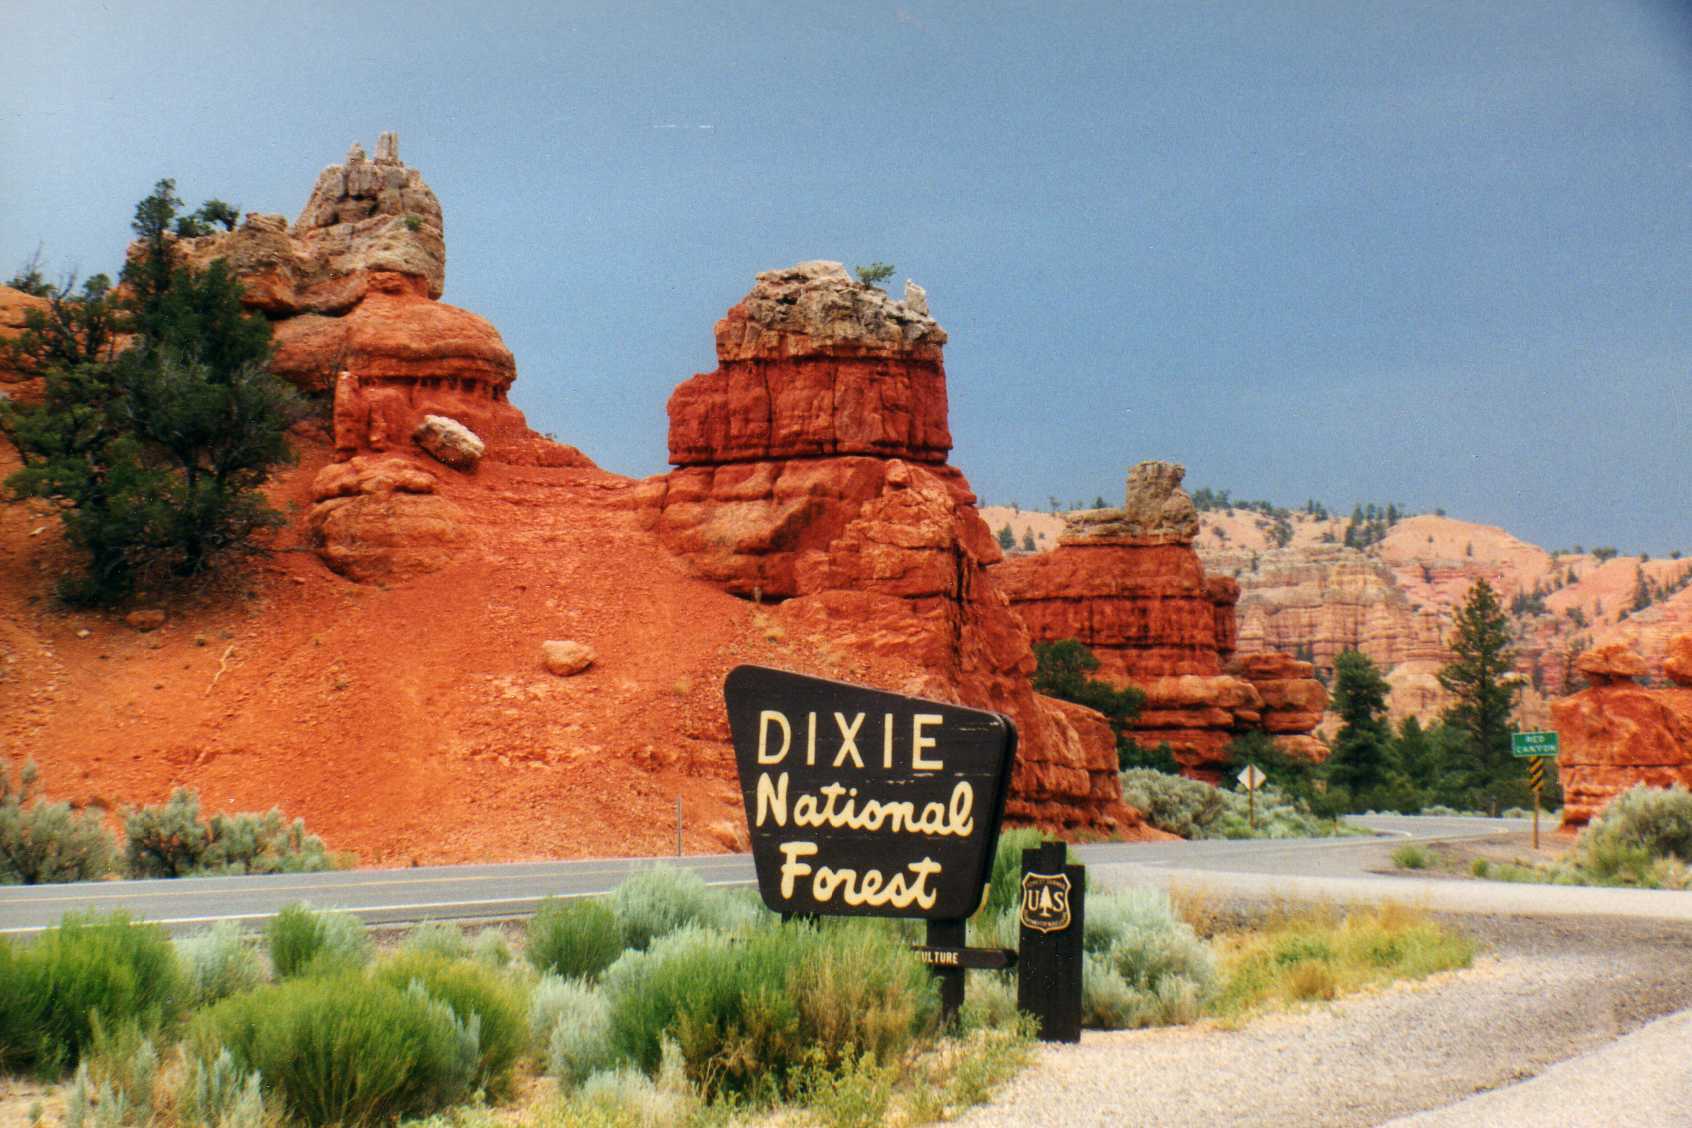 <p>Connecting the Bryce Canyon and Capitol Reef national parks, <a href="https://www.visitutah.com/articles/the-all-american-road-scenic-byway-12" title="https://www.visitutah.com/articles/the-all-american-road-scenic-byway-12">Utah’s Scenic Byway 12</a> delivers one amazing natural scene after another in almost 123 miles of driving bliss. Some of the highlights include the one-of-a-kind geological features of Grand Staircase–Escalante National Monument, the hairpin turns of the “Hogsback” between Boulder and Escalante, and multiple state parks, like Kodachrome Basin, Escalante Petrified Forest and Anasazi State Park Museum.</p>